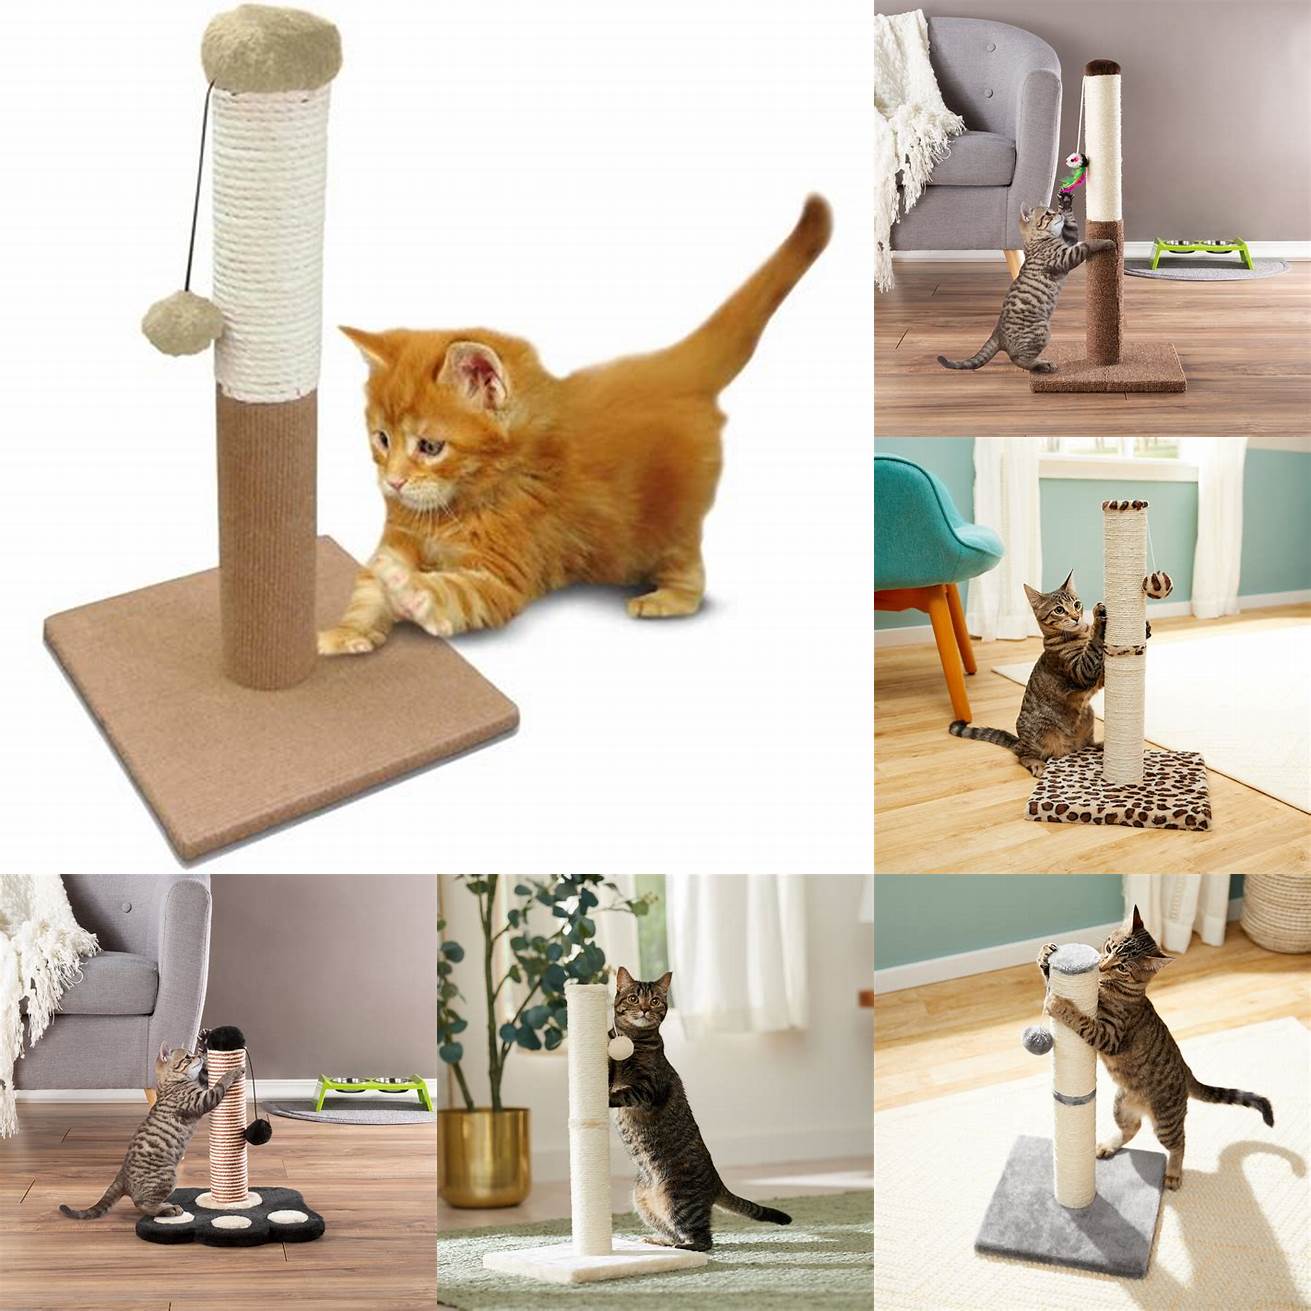 Make sure your cat has access to toys and scratching posts